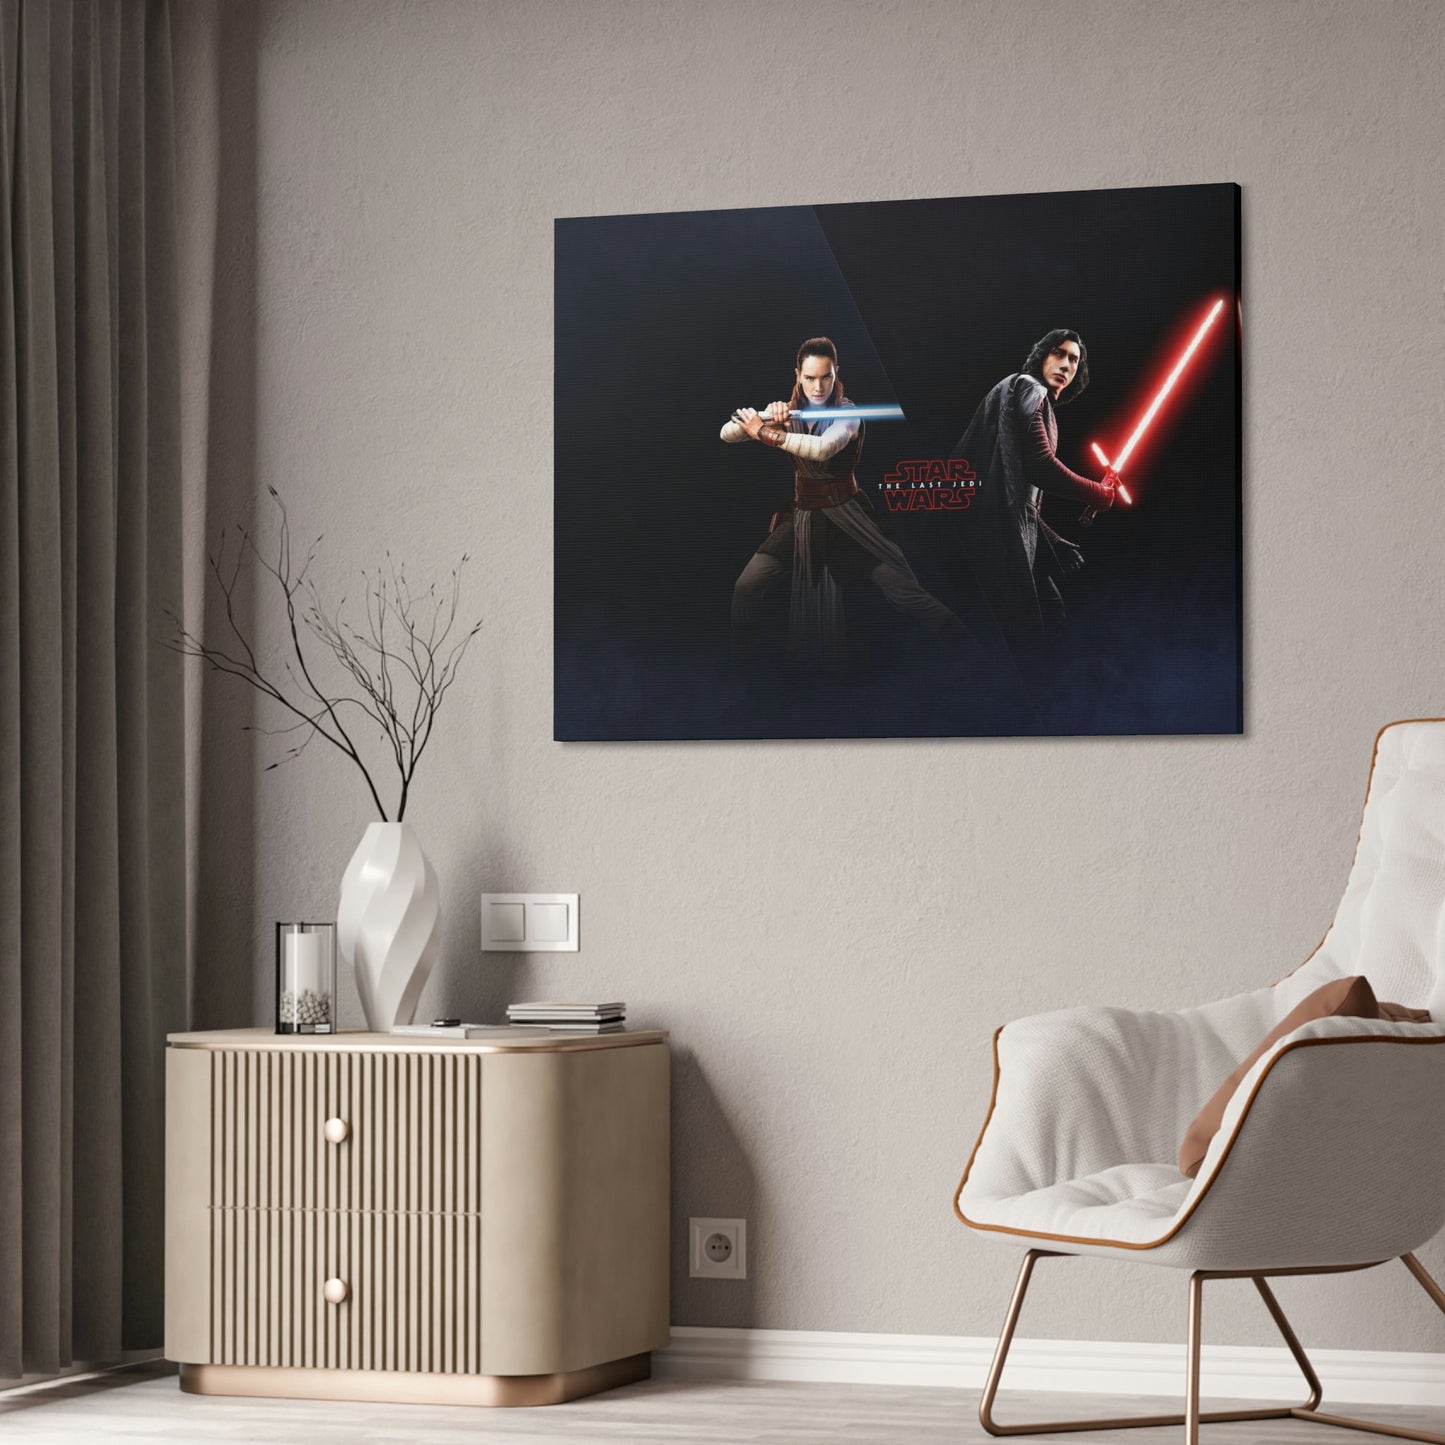 Battle for the Galaxy: Star Wars Wall Art on Canvas & Poster for Sci-Fi Fans